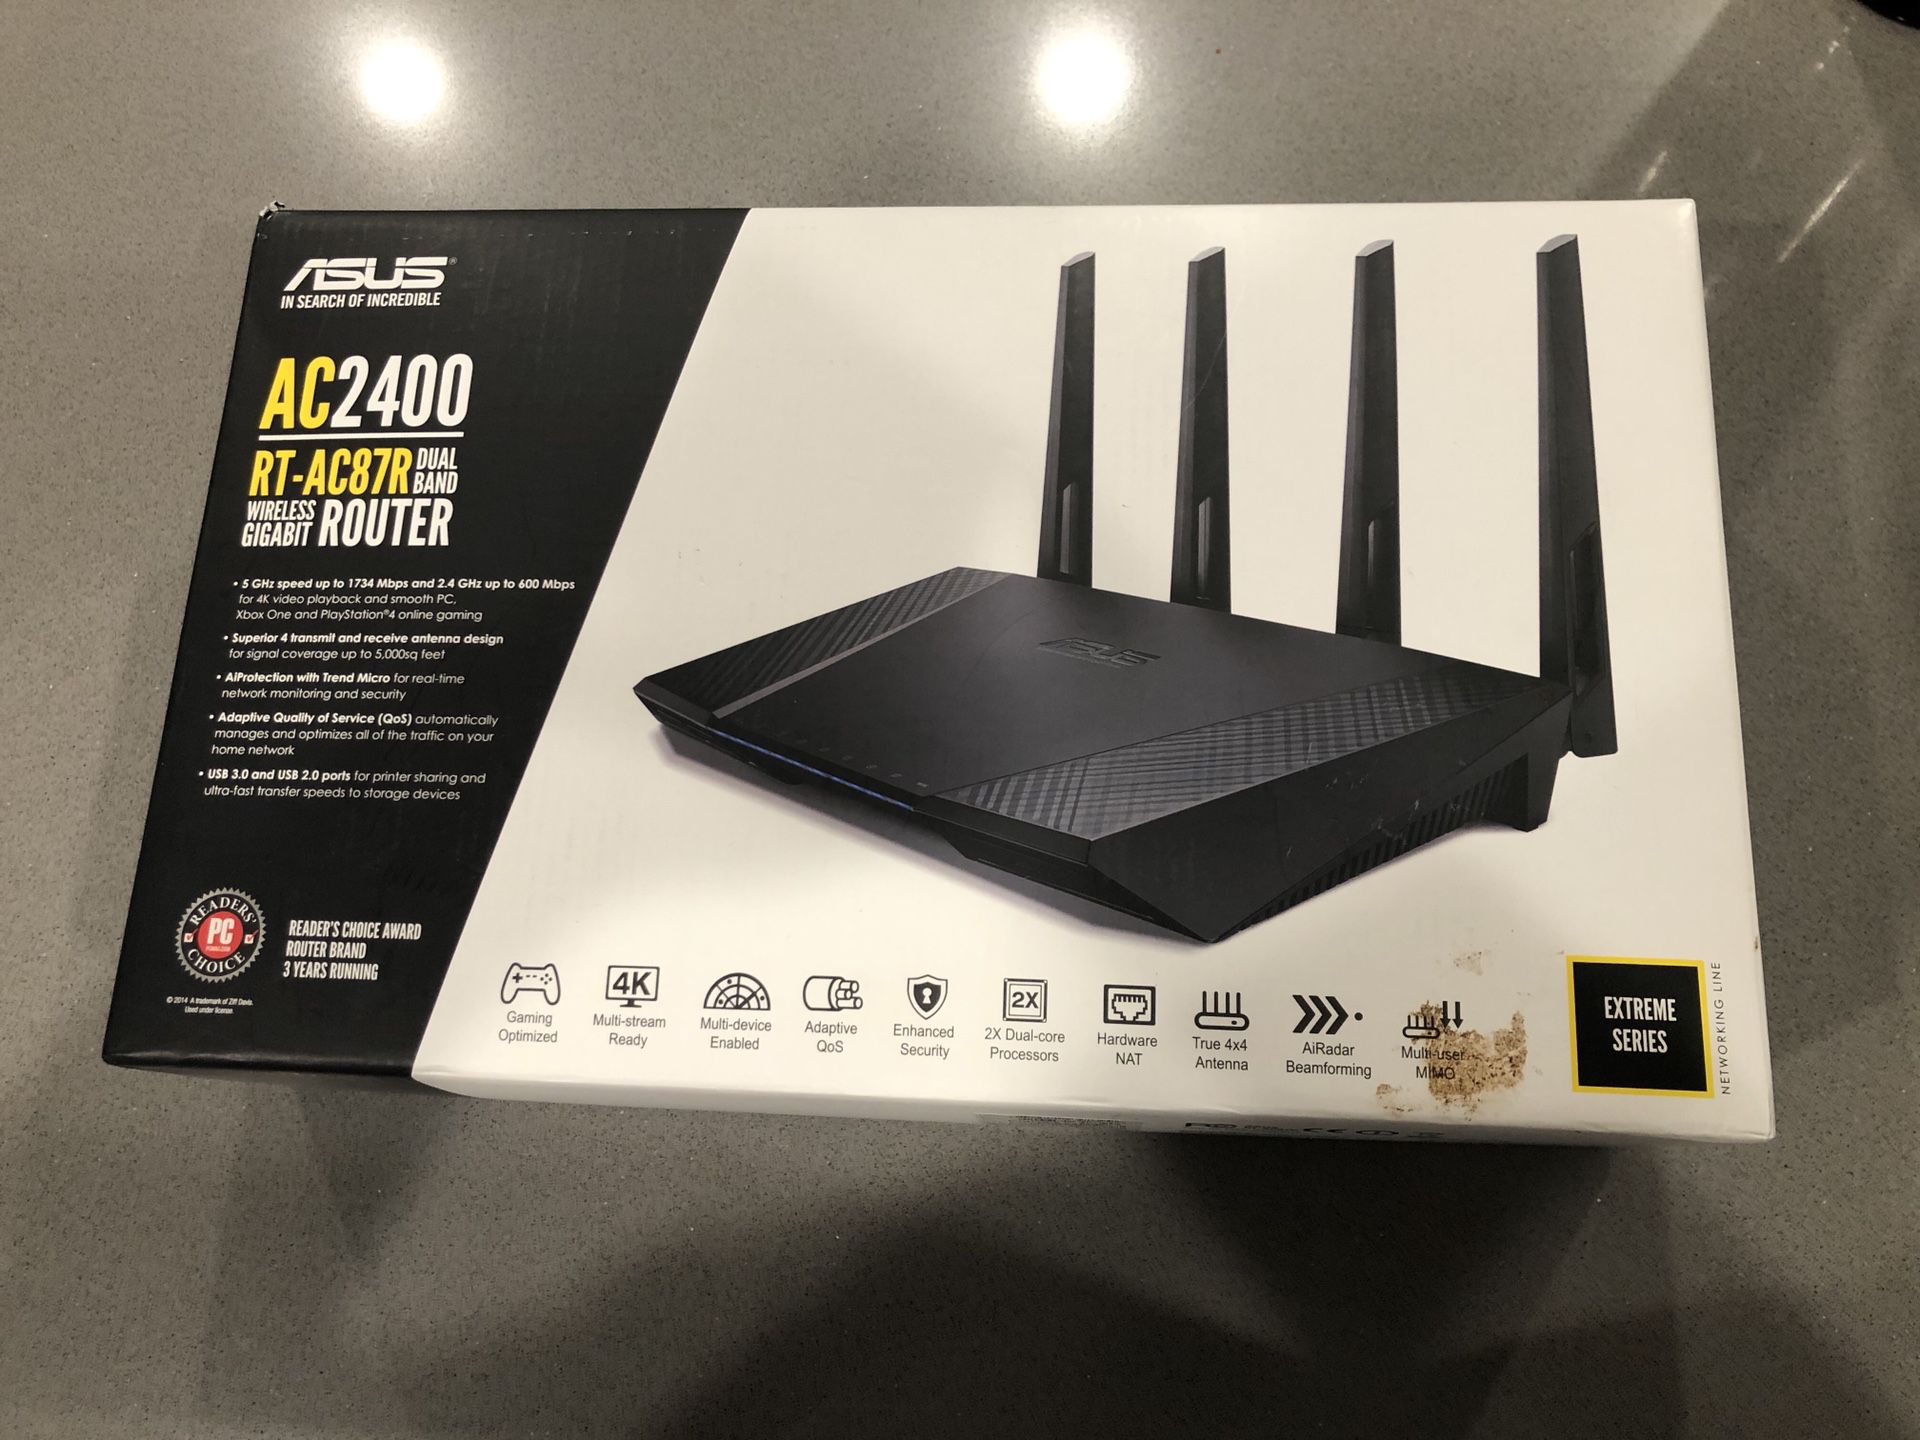 ASUS AC2400 router